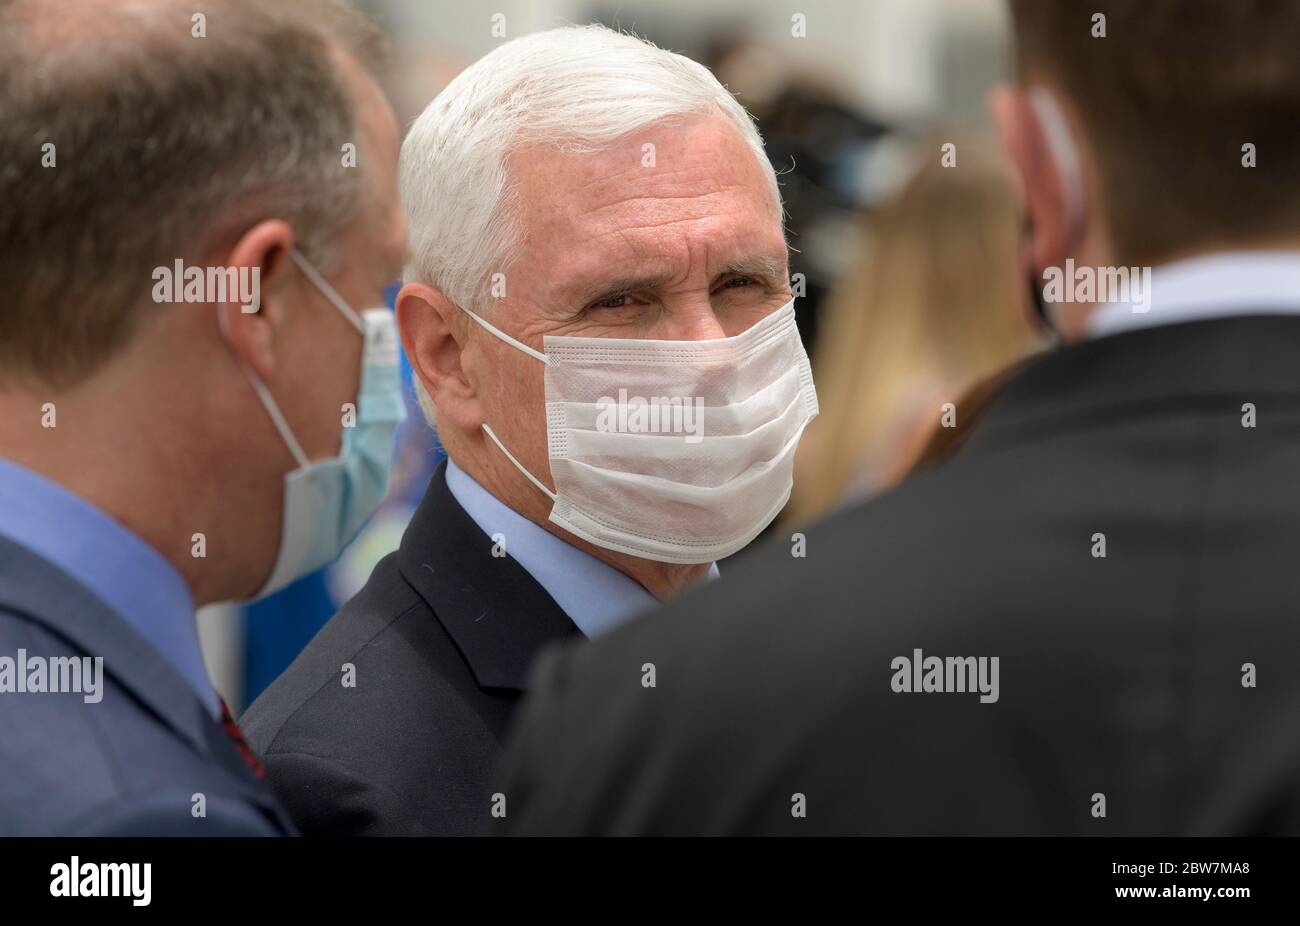 U.S. Vice President Mike Pence talks with NASA Administrator Jim Bridenstine, left, and Elon Musk, SpaceX Chief Engineer as they wait to see NASA astronauts Robert Behnken and Douglas Hurley as they depart for Launch Complex 39A to board a SpaceX Crew Dragon spacecraft for launch, at the Kennedy Space Center May 27, 2020 in Cape Canaveral, Florida. The mission was scrubbed 16 minutes before launch due to weather and will try again on the 30th. Stock Photo